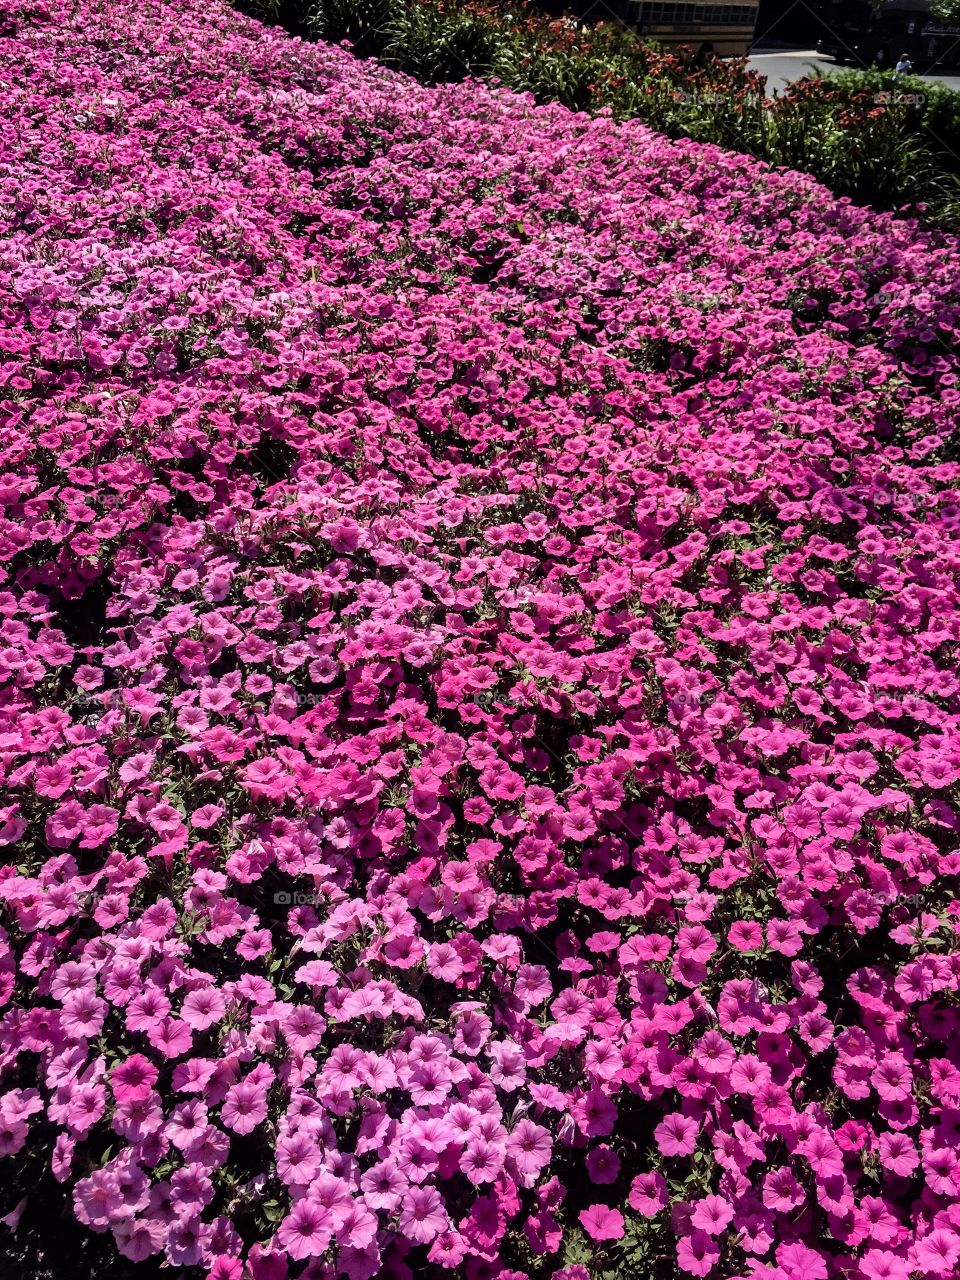 Pink bed of flowers